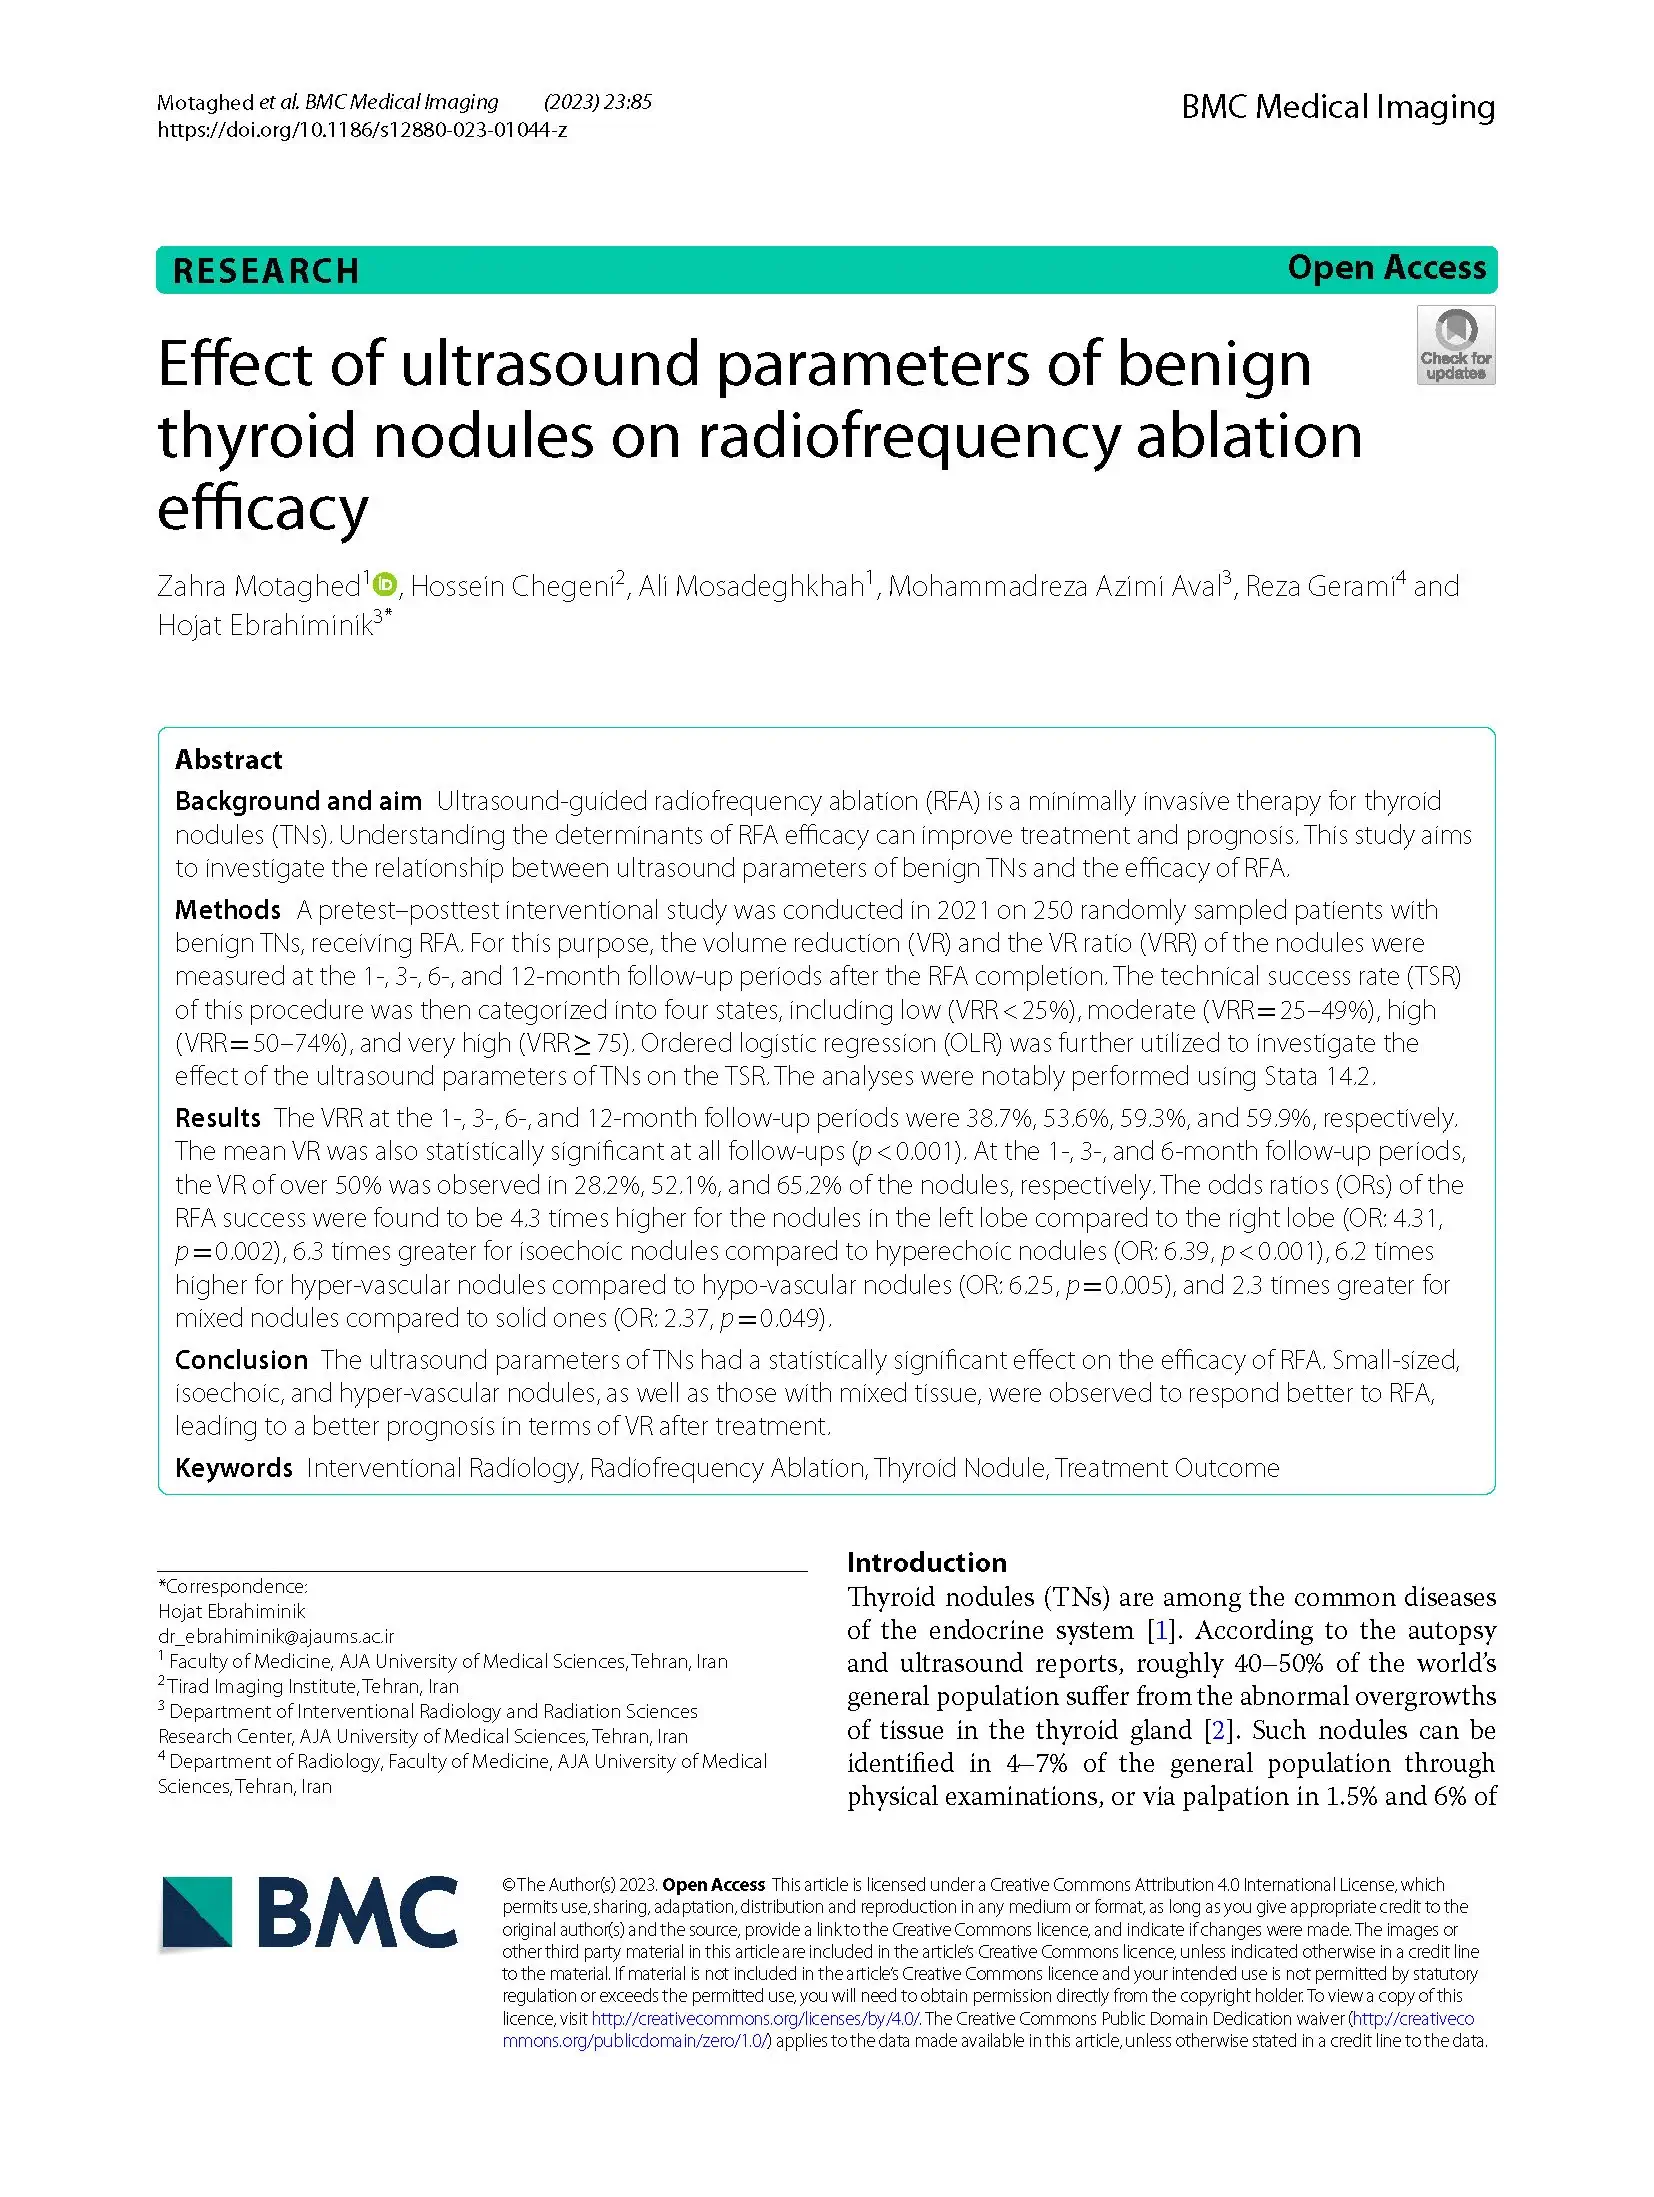 Effect of ultrasound parameters of benign thyroid nodules on radiofrequency ablation efficacy